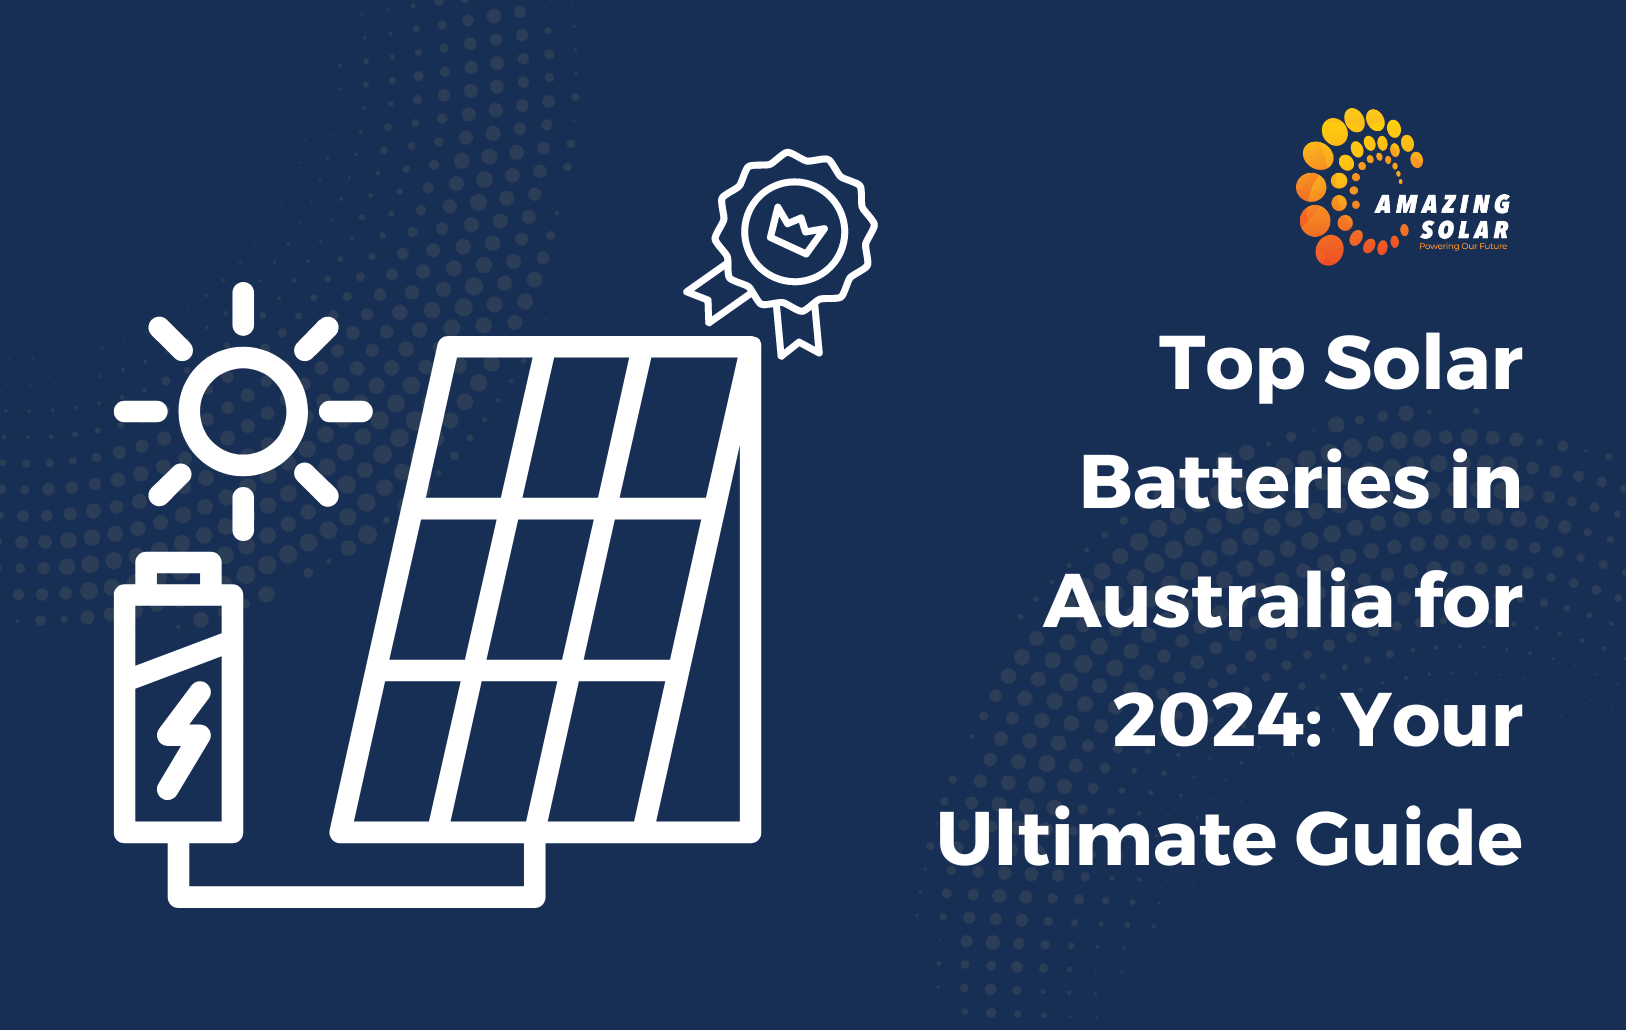 Top Solar Batteries in Australia for 2024: Your Ultimate Guide